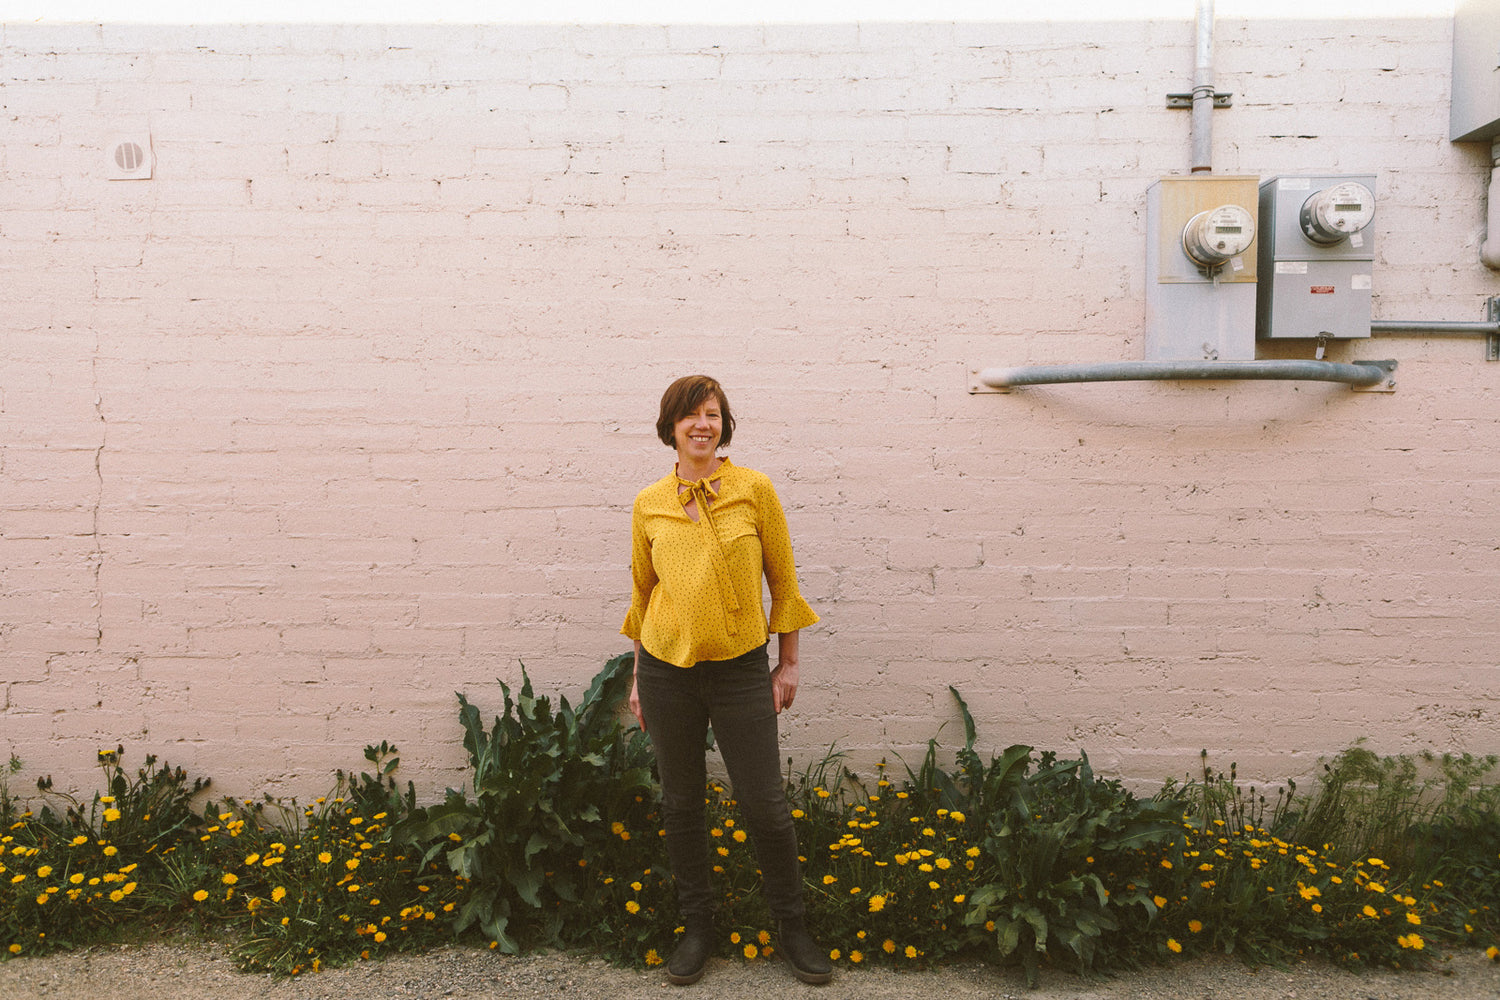 The designer wears a yellow shirt and stands outside in front of a light colored brick building lined with dandelions in bloom.